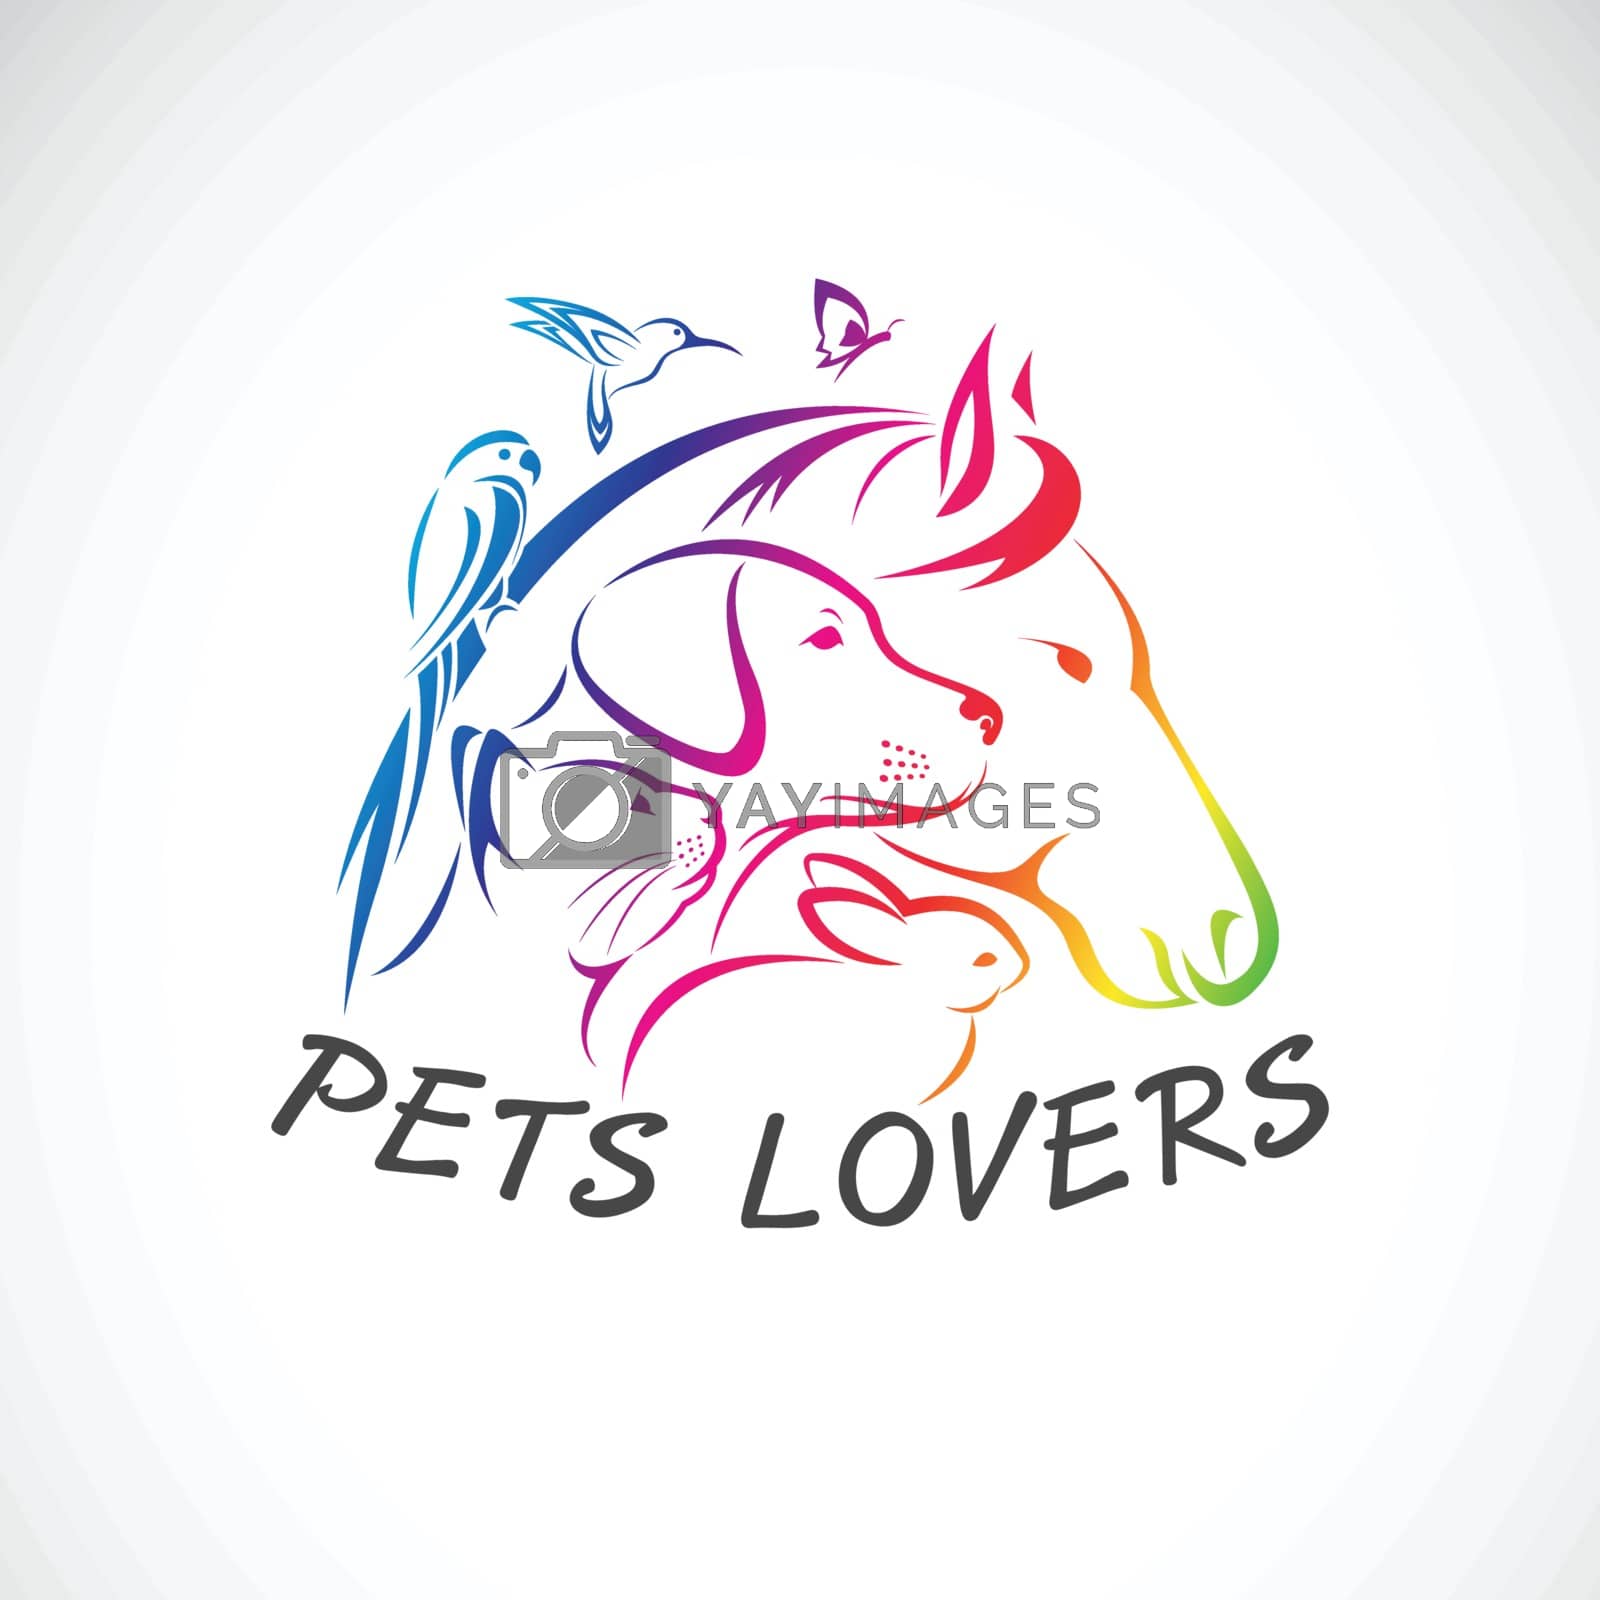 Vector group of pets - Horse, Dog, Cat, Humming bird, Parrot, Butterfly, Rabbit isolated on white background. Pet Icon or logo, Easy editable layered vector illustration. Animal group.